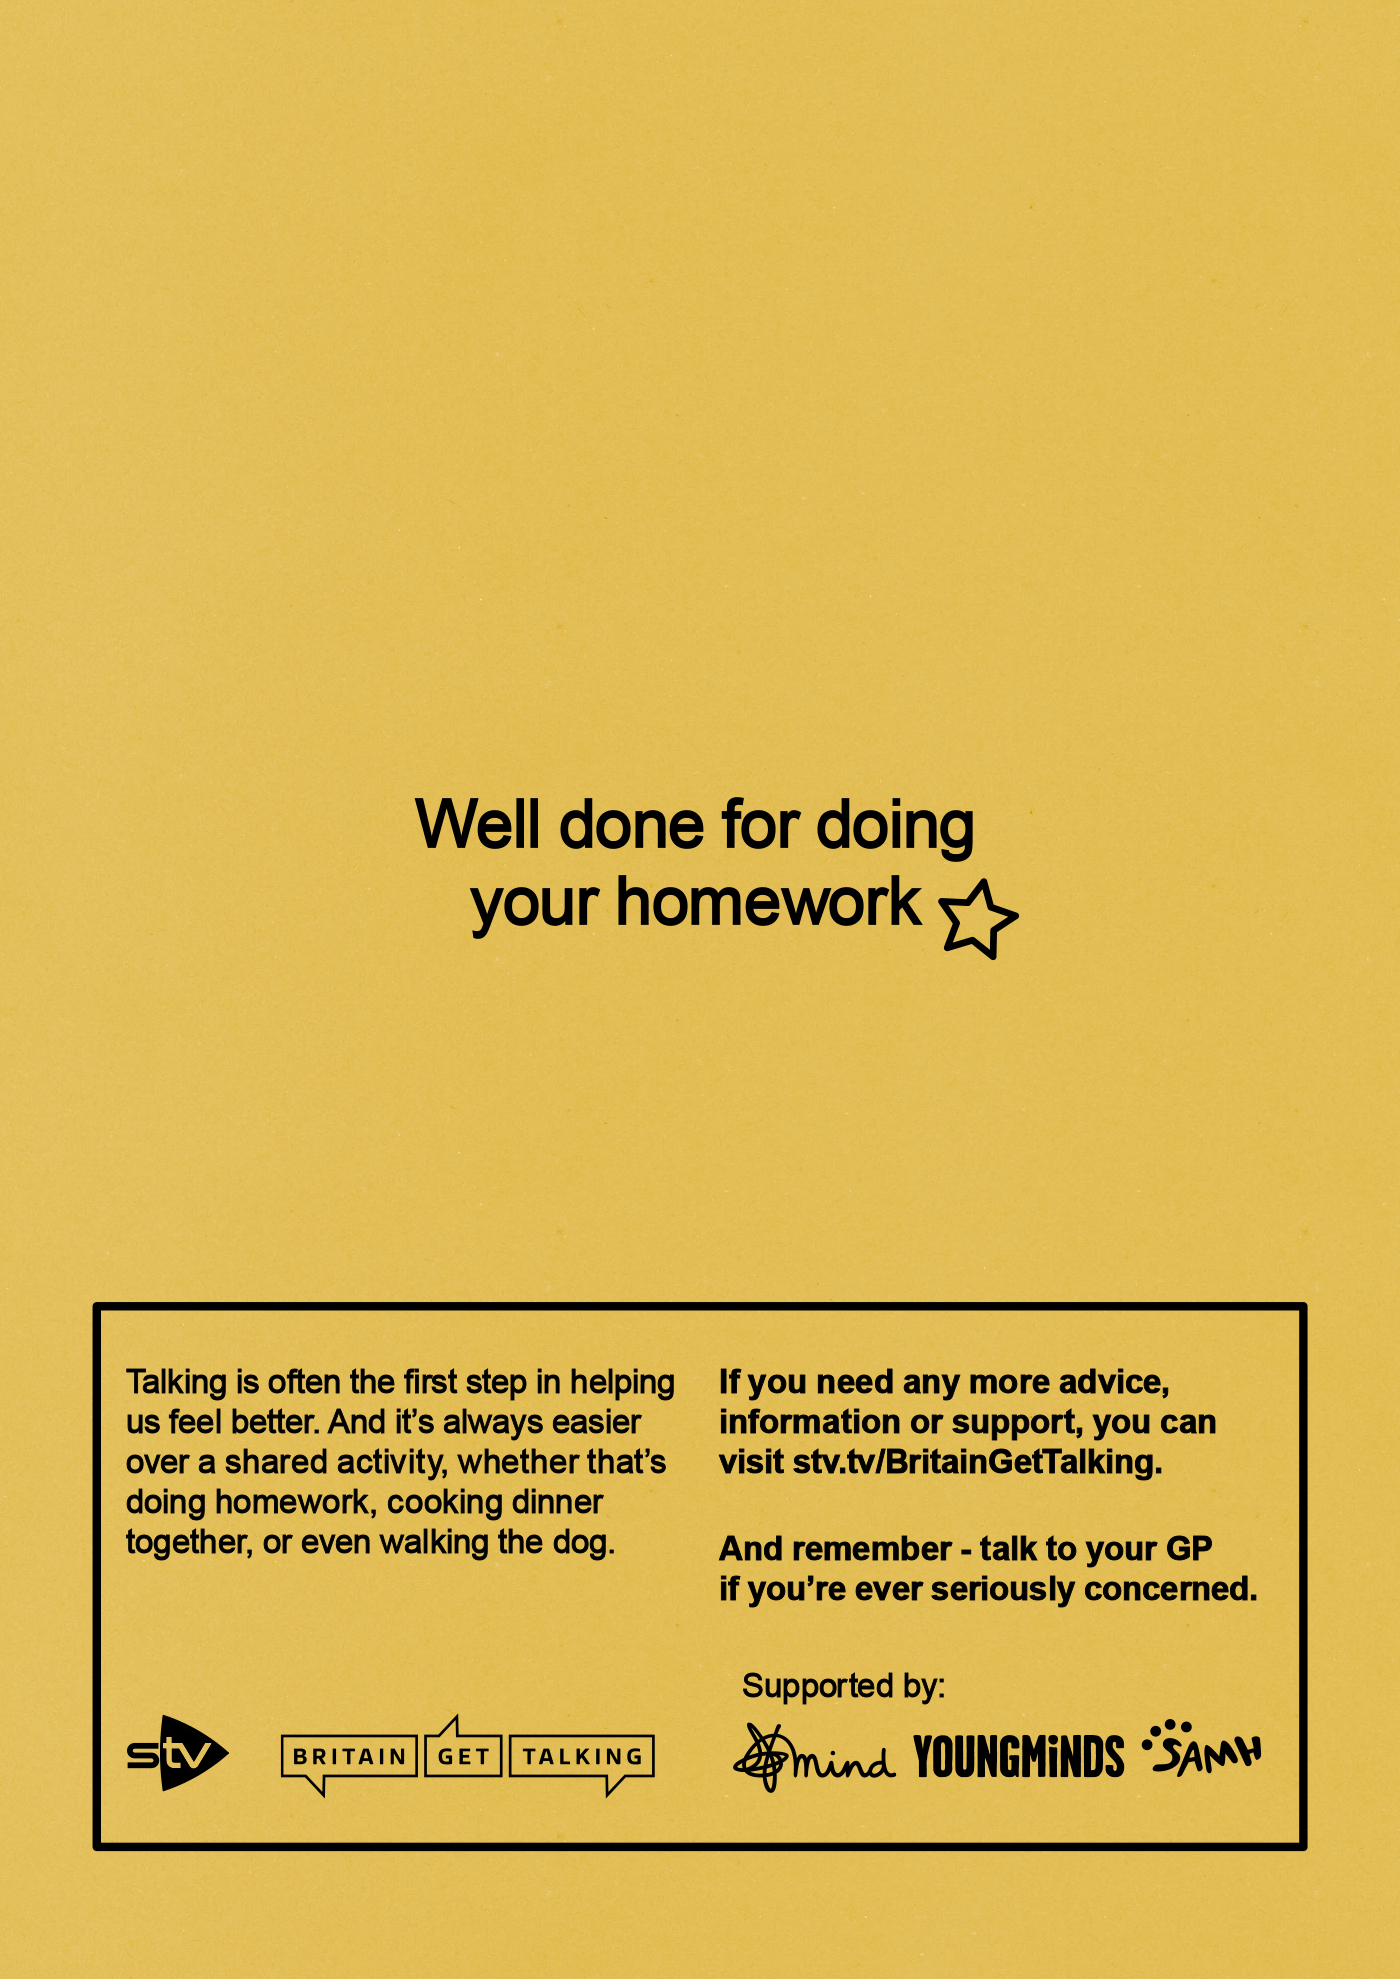 The back of the exercise book. The text reads 'Well done for doing your homework. Talking is often the first step in helping us feel better. And remember, it's always easier over a shared activity, whether that's helping with homework, cooking dinner together, or even walking the dog. World Mental Health Day is a great excuse to have a chat, but talking is a tool we can use at any time to improve our mental wellness. If you need any more advice, information or support, you can visit ITV.com/BritainGetTalking. And remember - talk to your GP if you're ever seriously concerned. Supported by ITV Britain Get Talking, YoungMinds and Mind.'